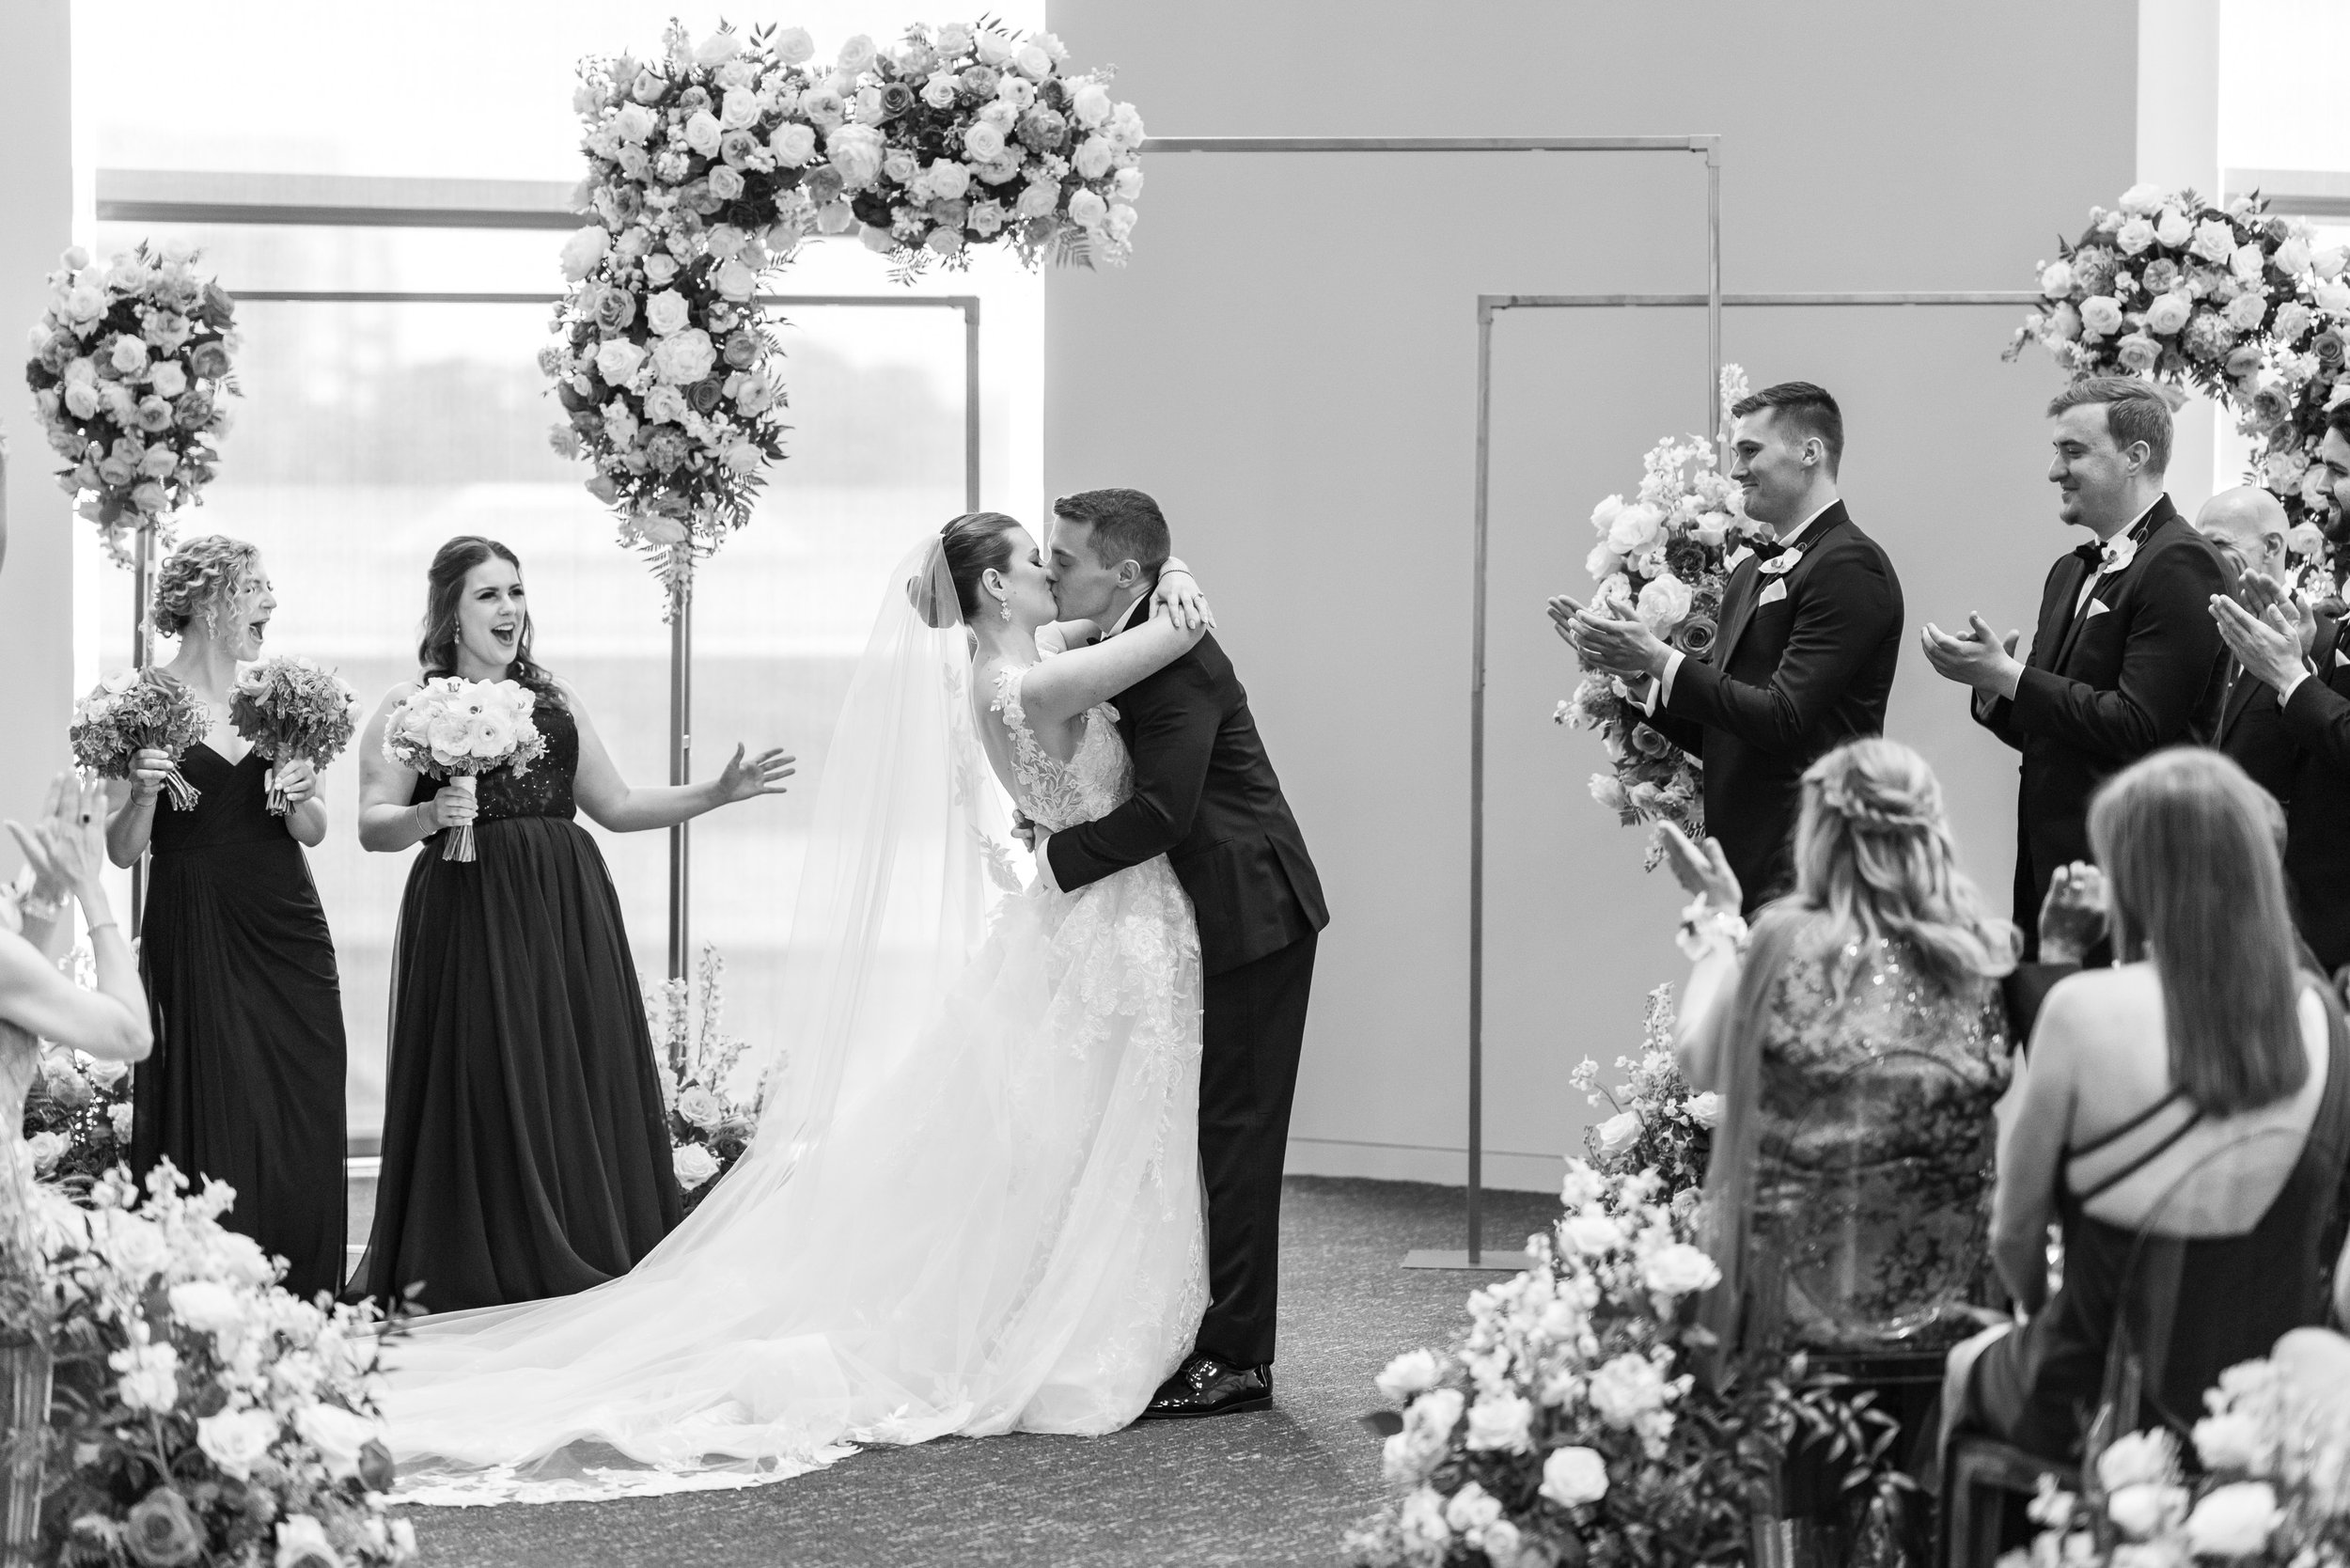 Bride and groom kiss at ceremony while bridesmaids cheer